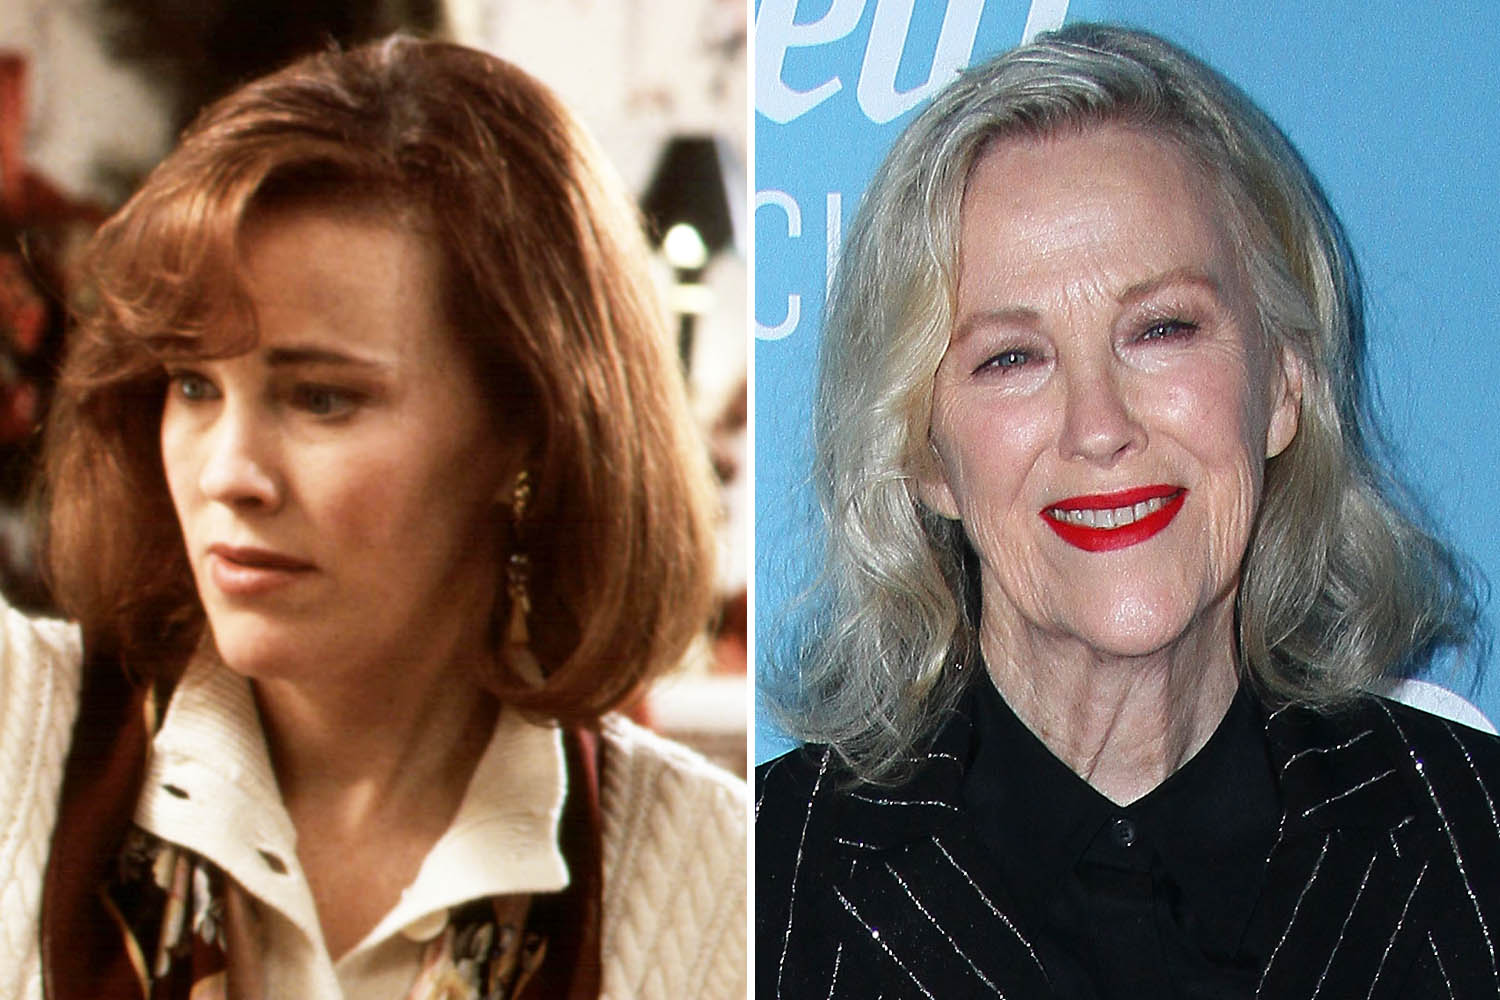 Catherine O'Hara was already a notable face before Home Alone, but she appeared in many films soon after